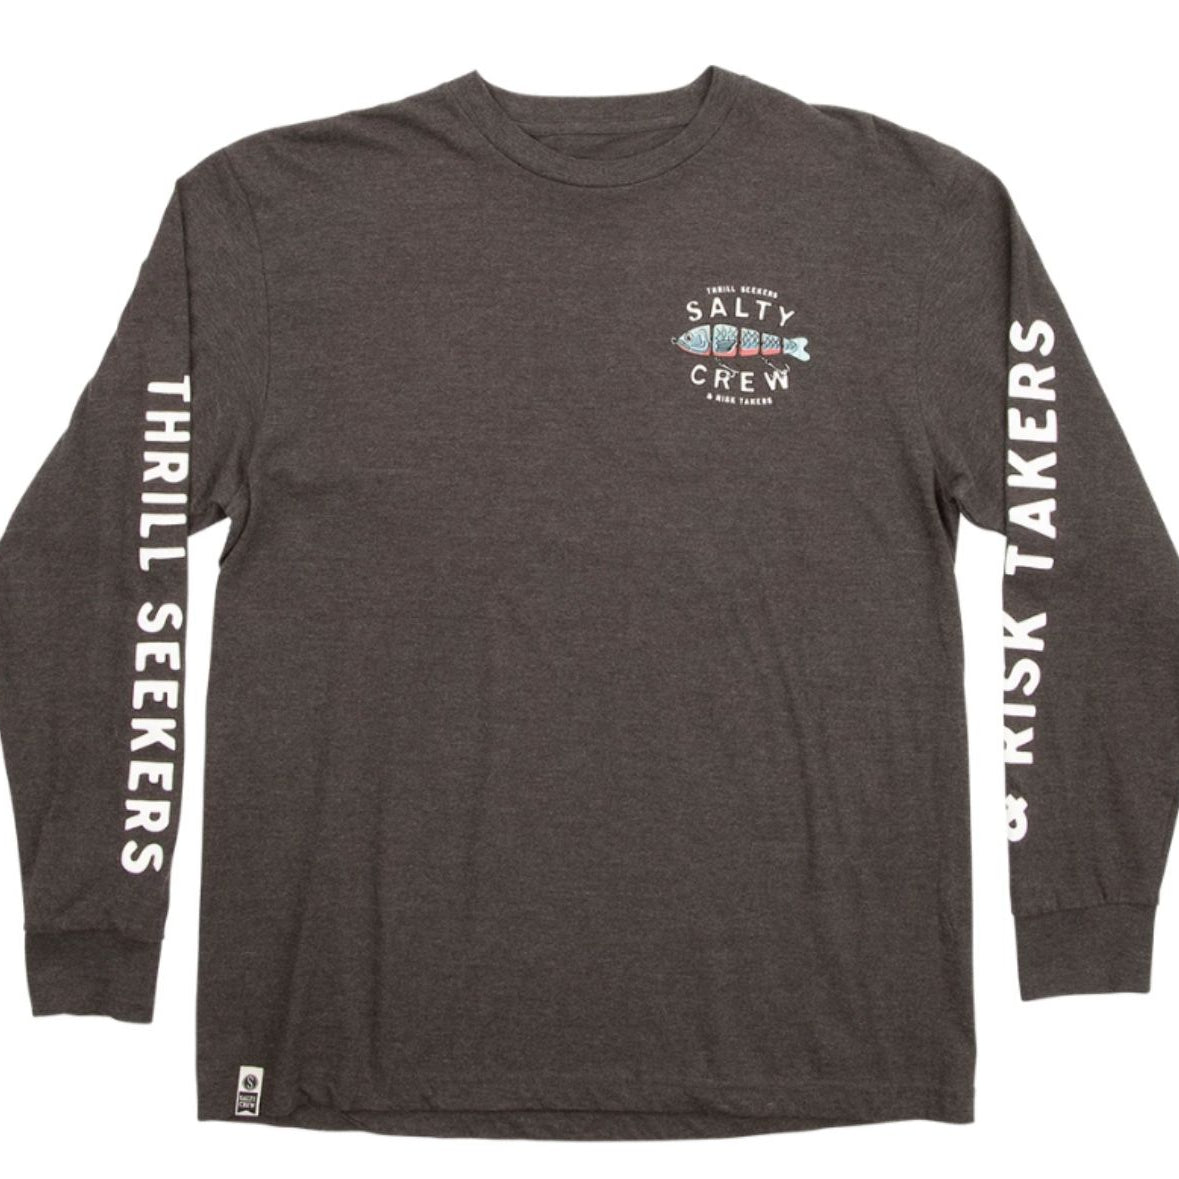 Salty Crew Paddle Tail LS Tee Charcoal Heather S